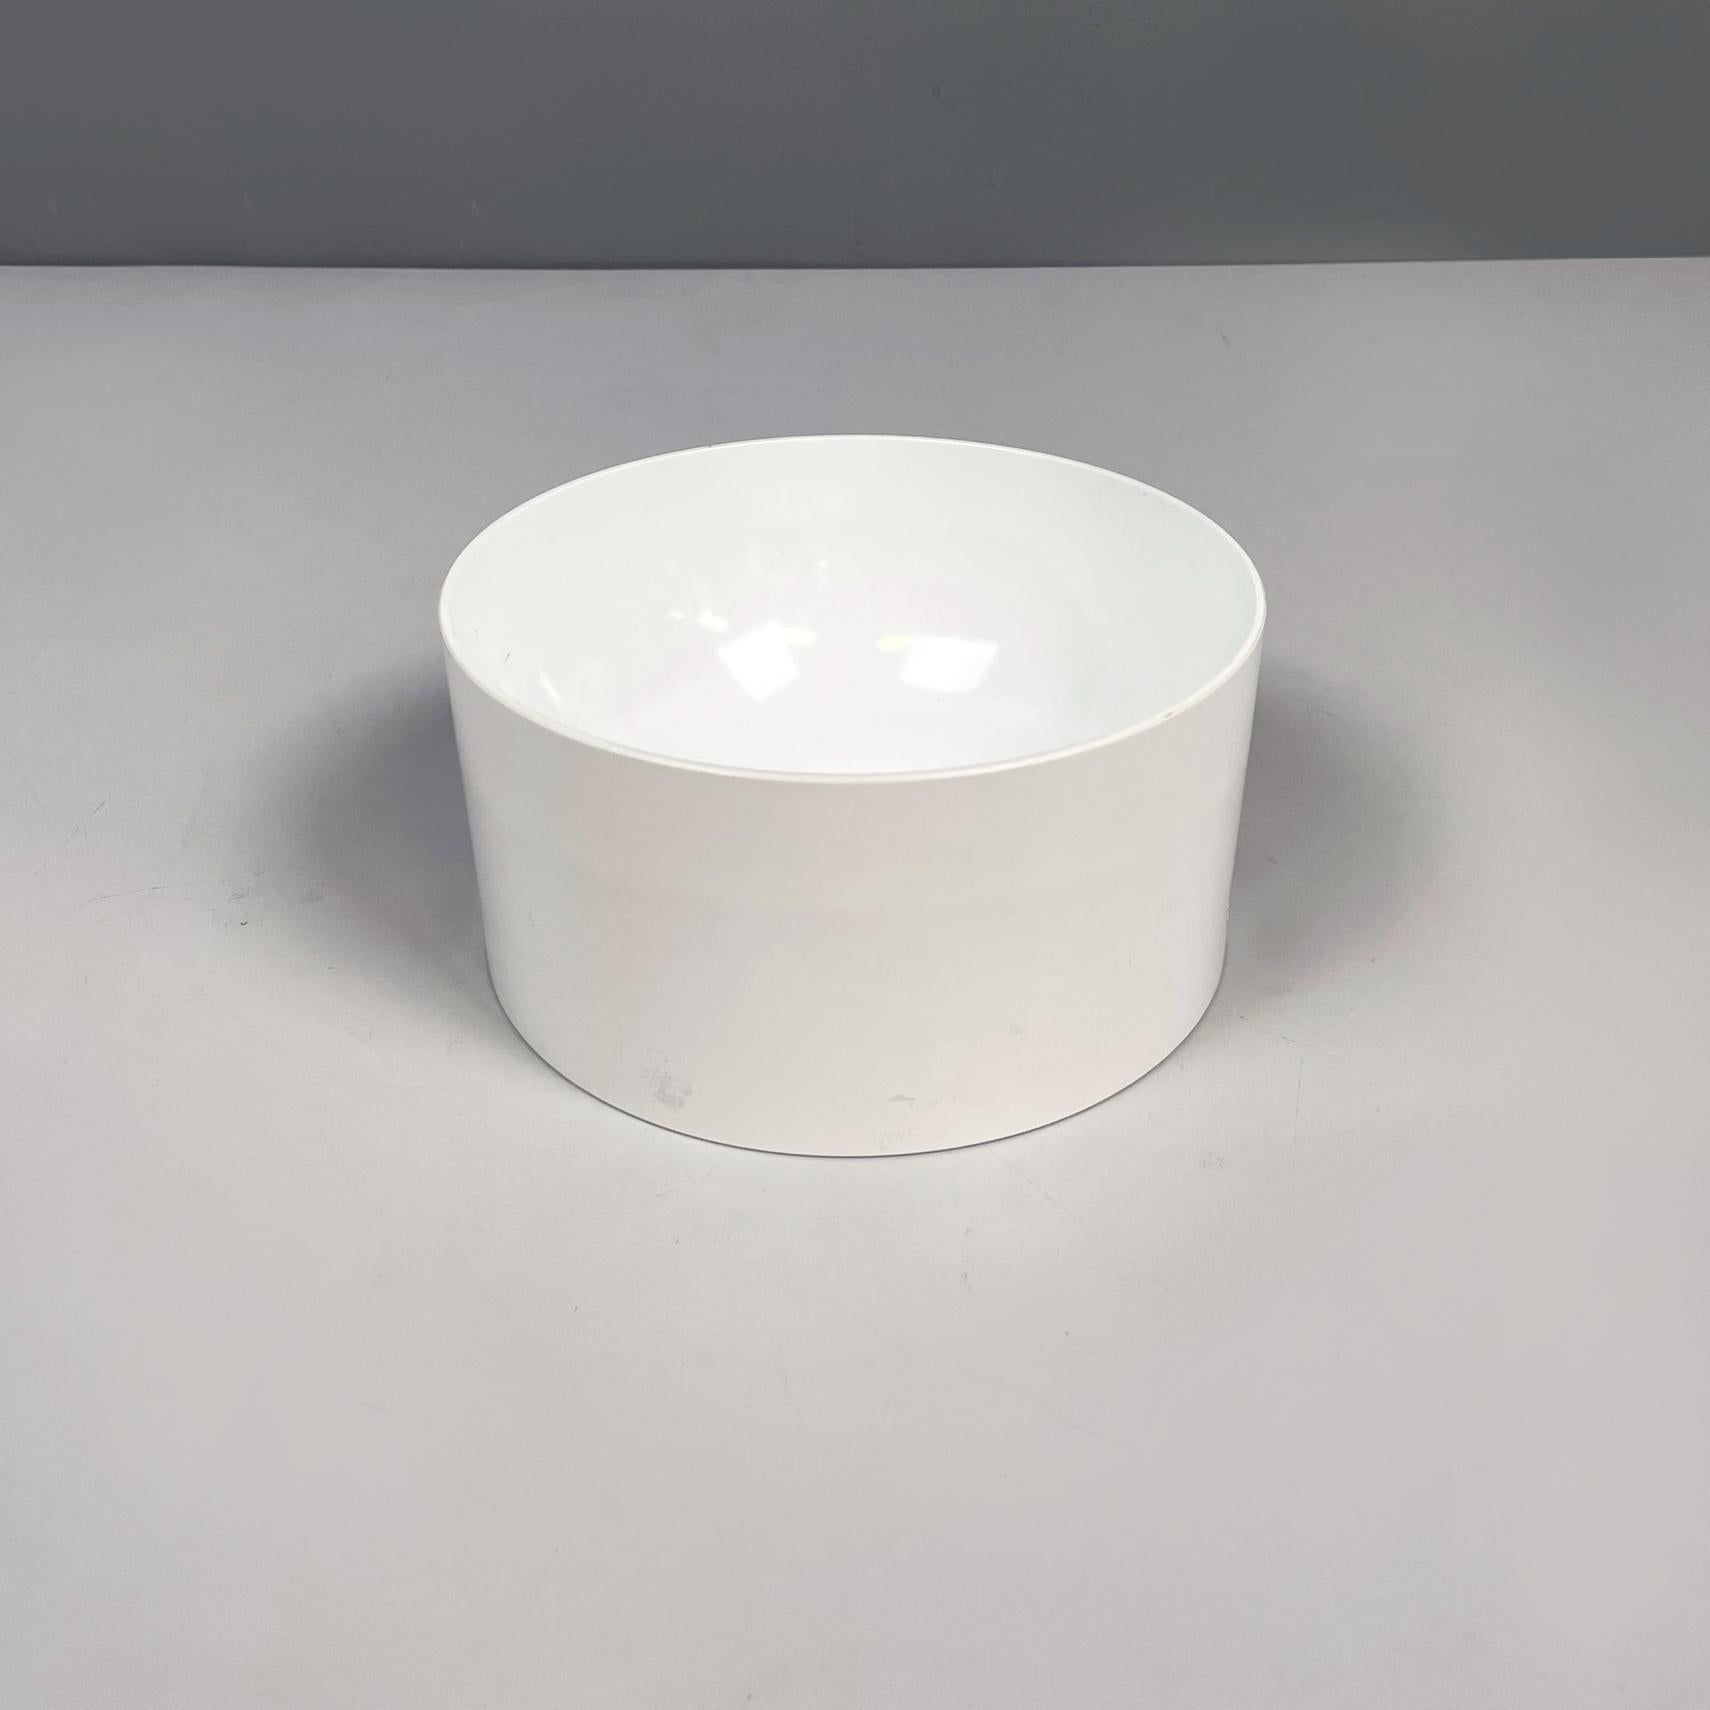 Italian modern space age White plastic cylindrical bowl by Enzo Mari for Danese, 1970s
Cylindrical bowl in white fiberglass. On the two sides it has a pair of round holes. It can be used as a centerpiece, fruit bowl or pocket emptier.
Produced by